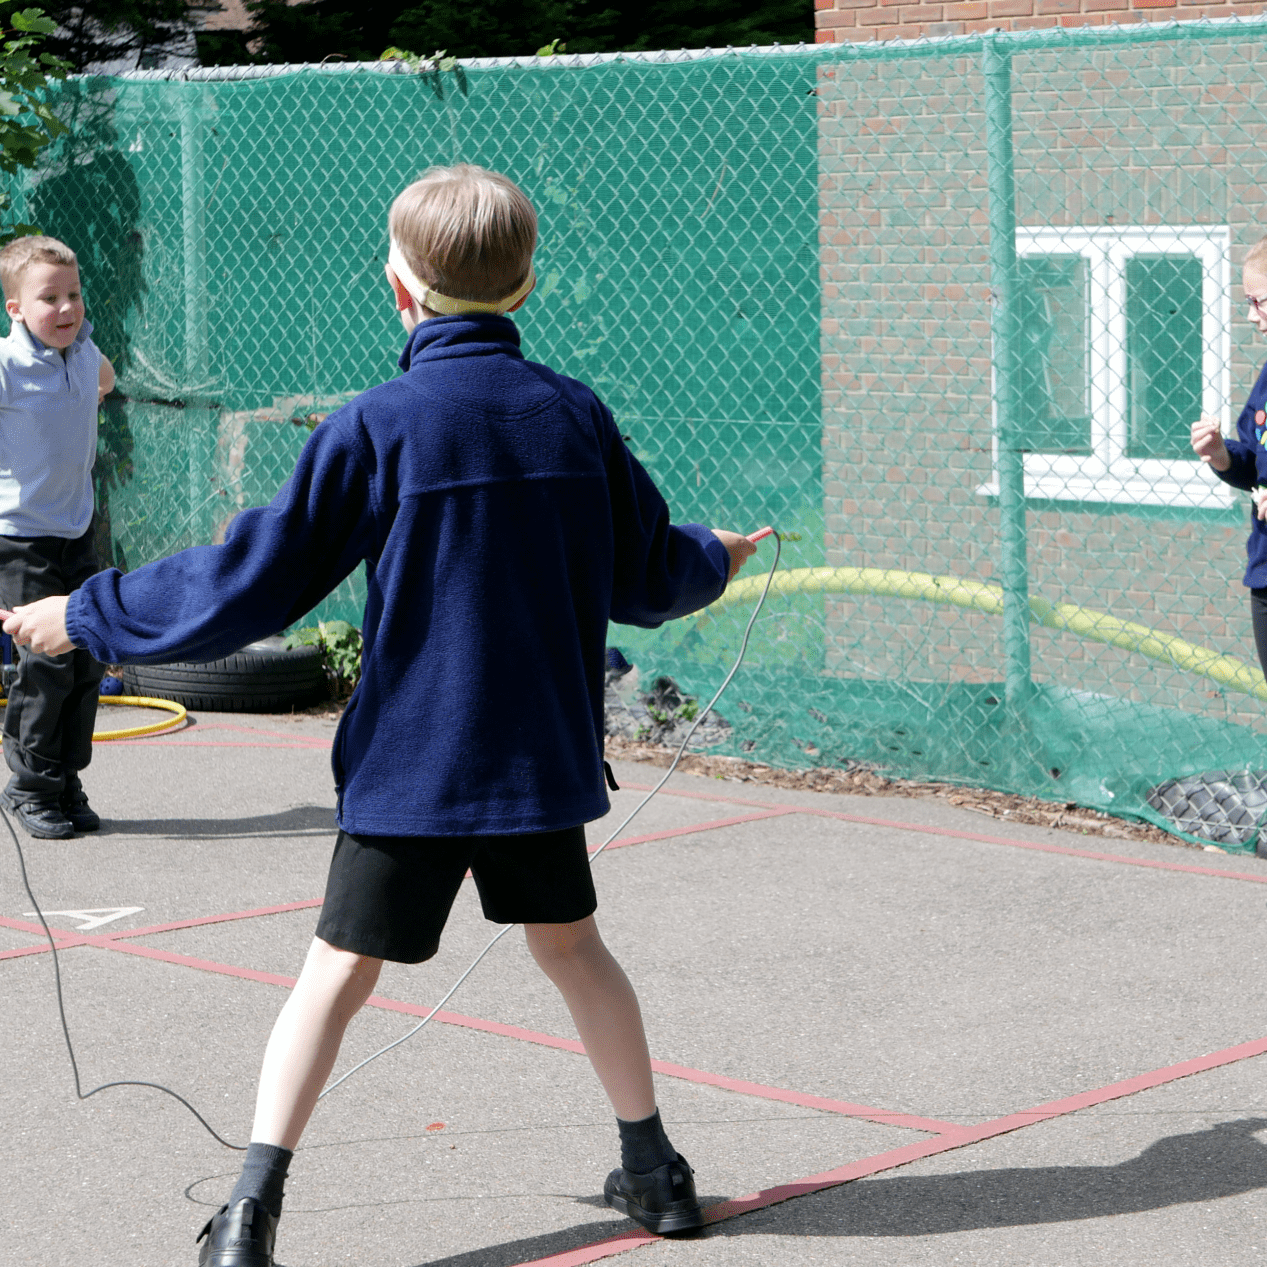 children skipping on the playground at rosherville cofe academy